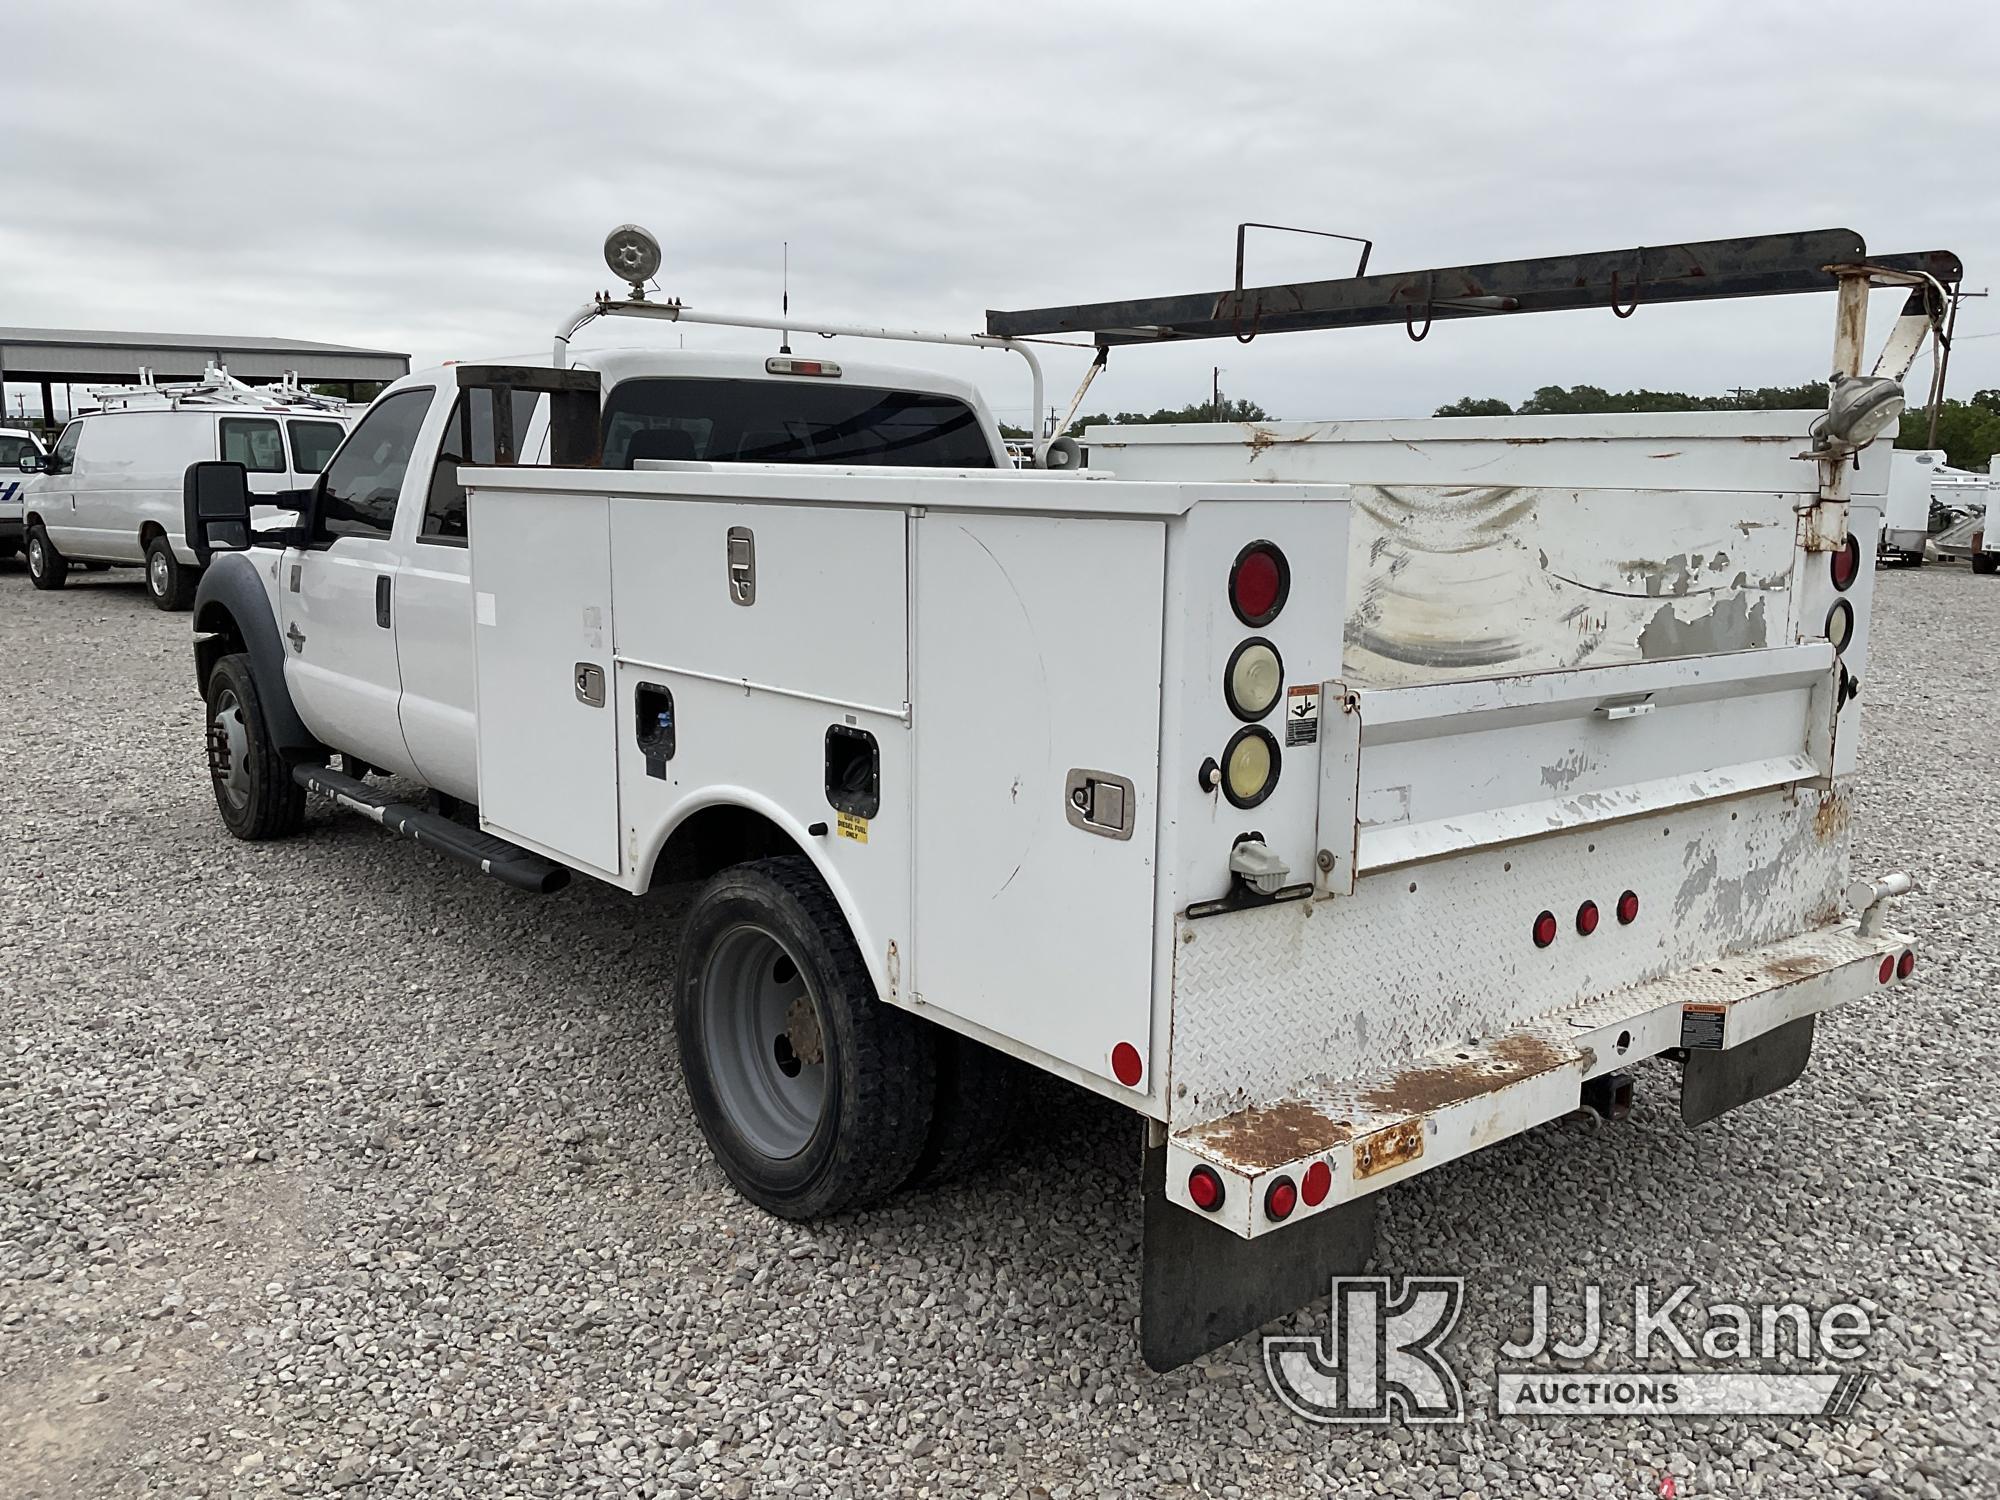 (Johnson City, TX) 2012 Ford F550 4x4 Crew-Cab Service Truck Runs & Moves) (Check Engine Light Is On